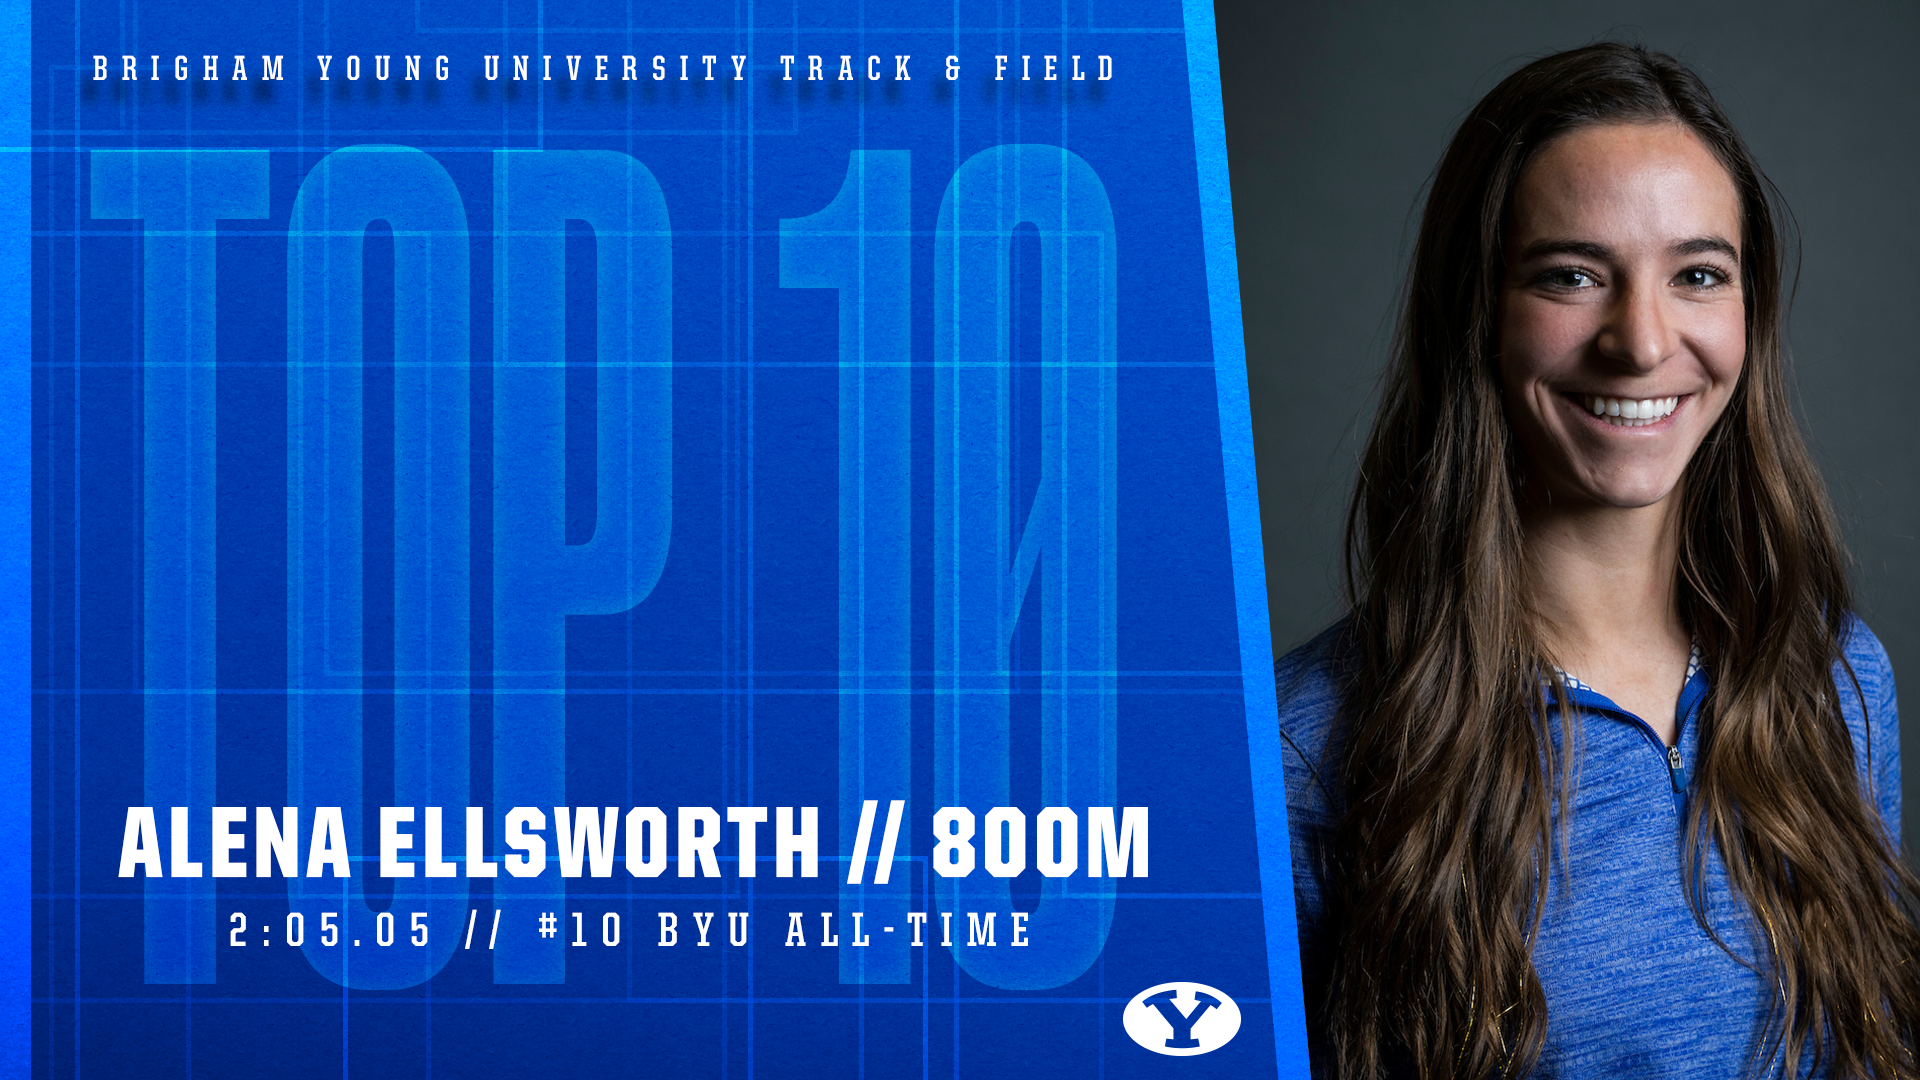 Alena Ellsworth No. 10 all-time at BYU in the women's indoor 800m.